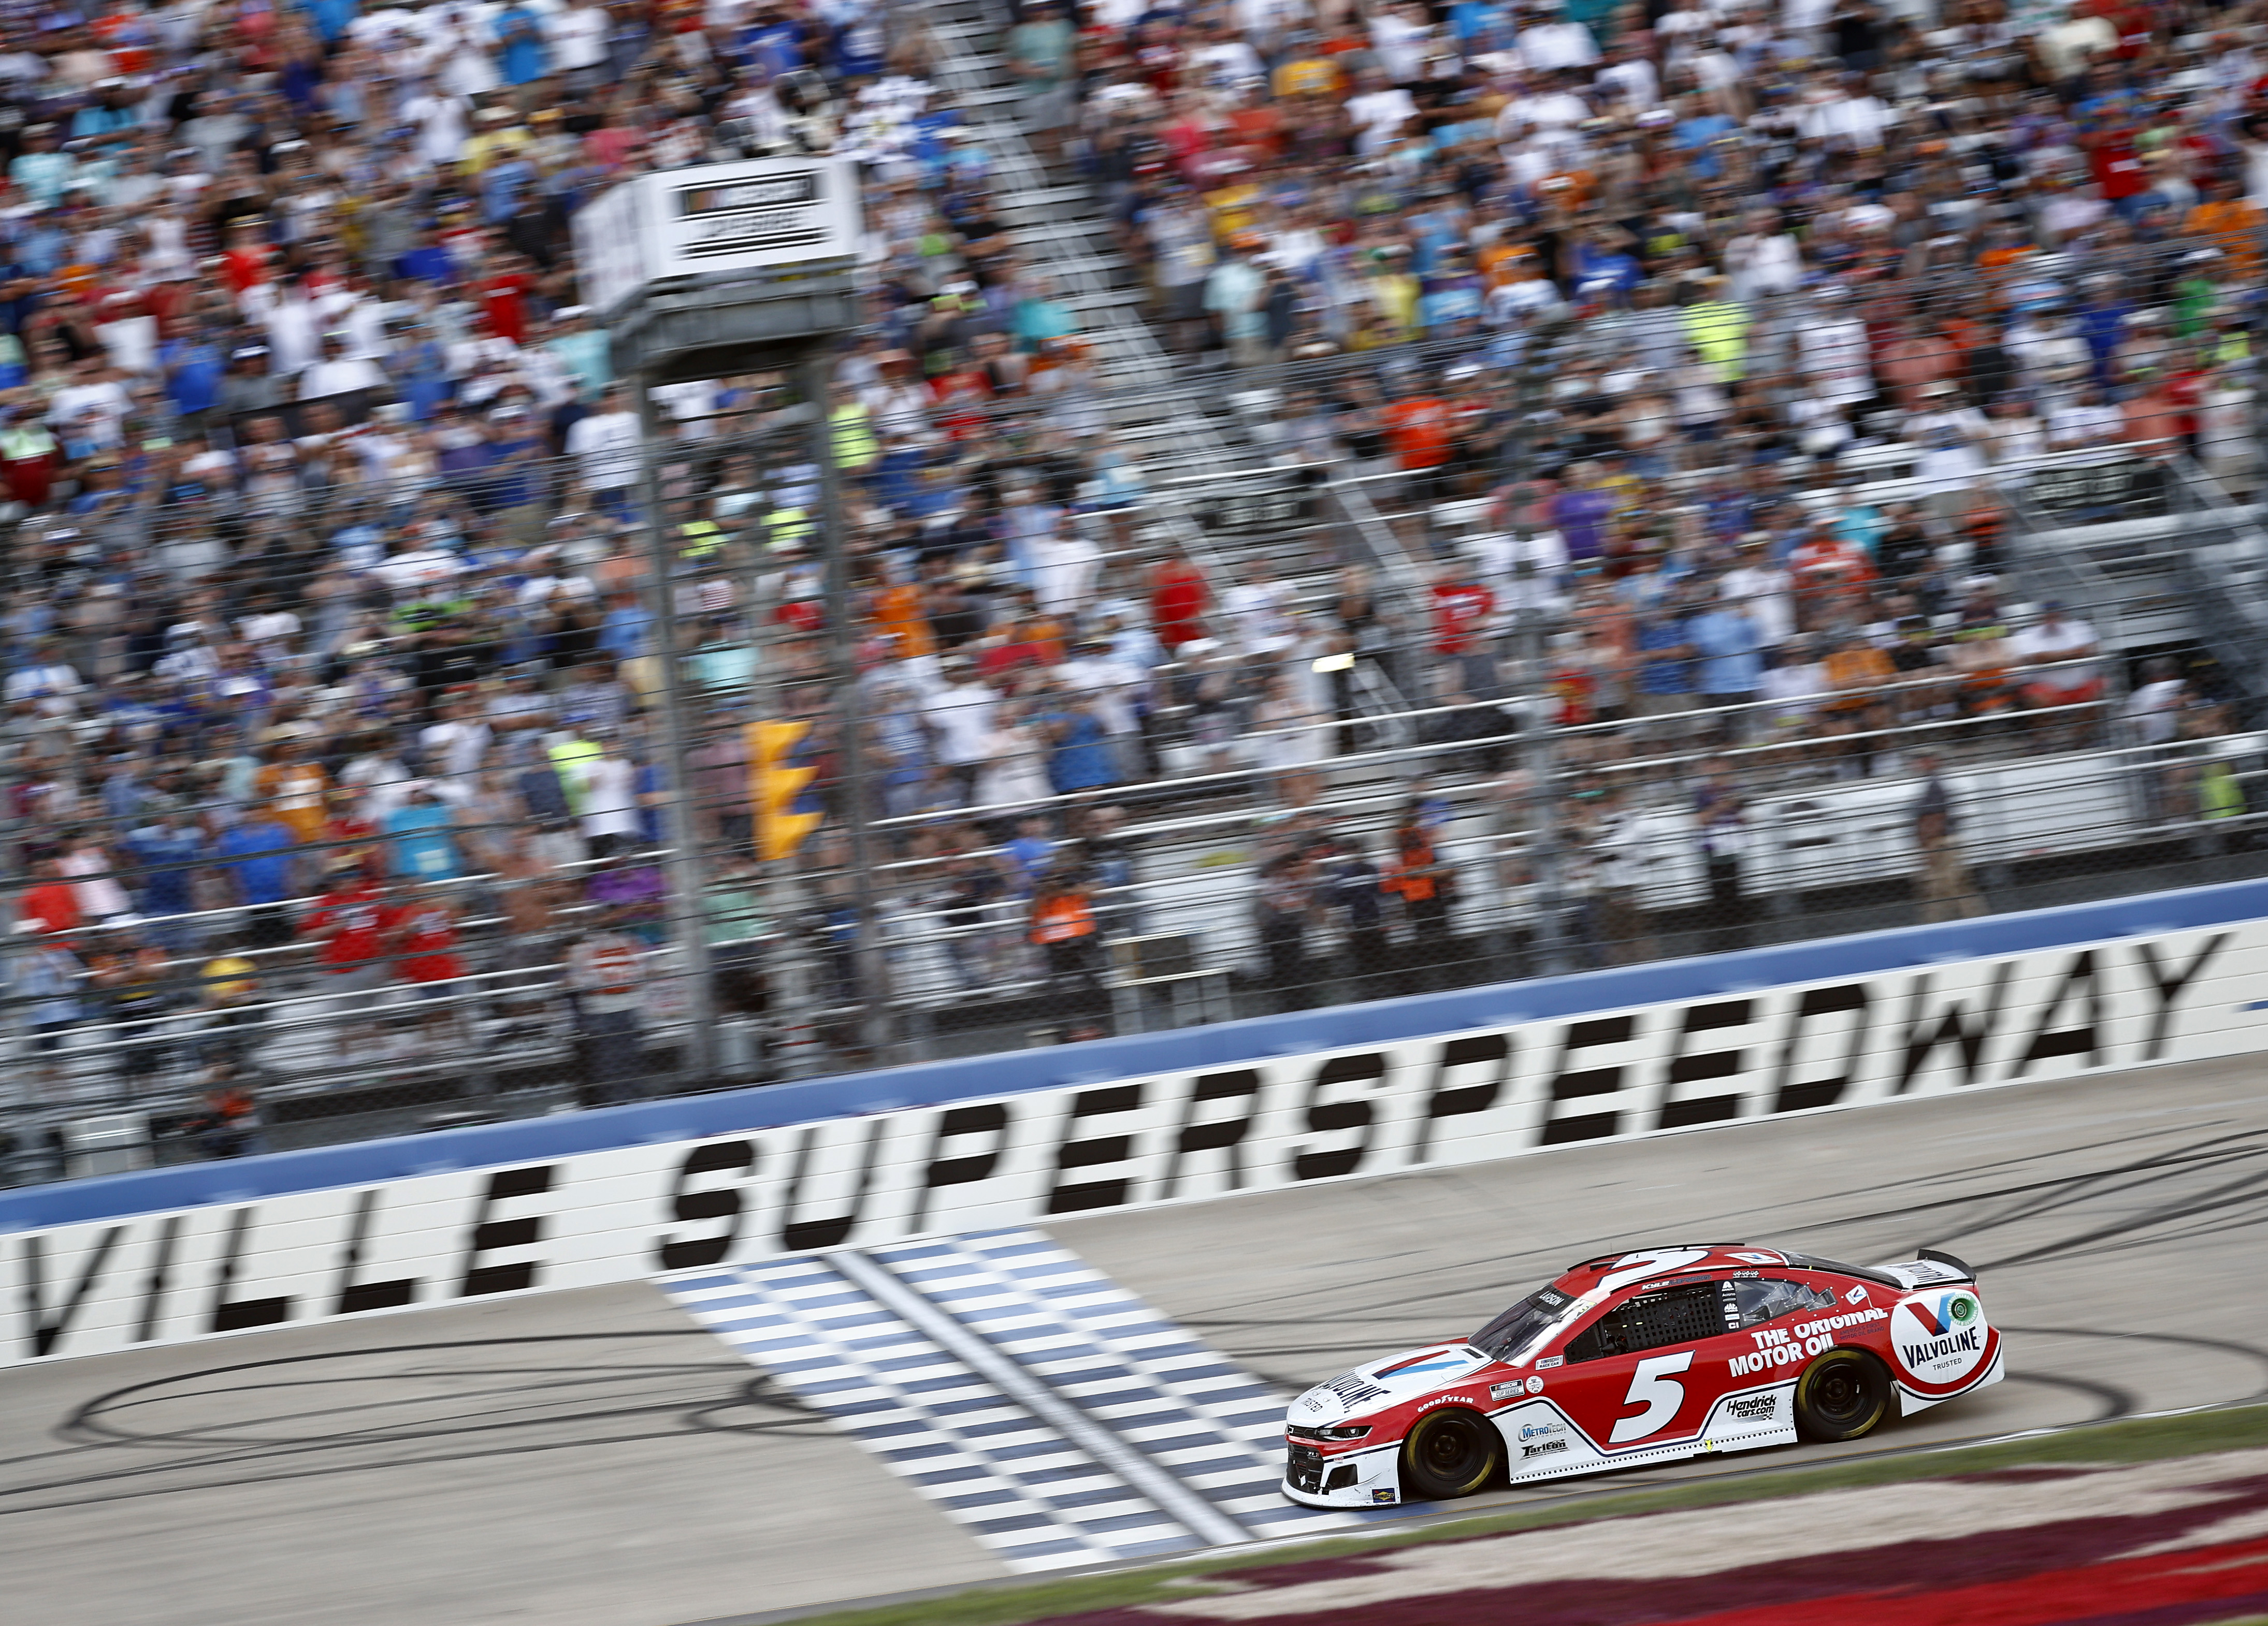 Kyle Larson, driver of the #5 Valvoline Chevrolet,crosses the finish line to win the NASCAR Cup Series Ally 400 at Nashville Superspeedway on June 20, 2021 in Lebanon, Tennessee.